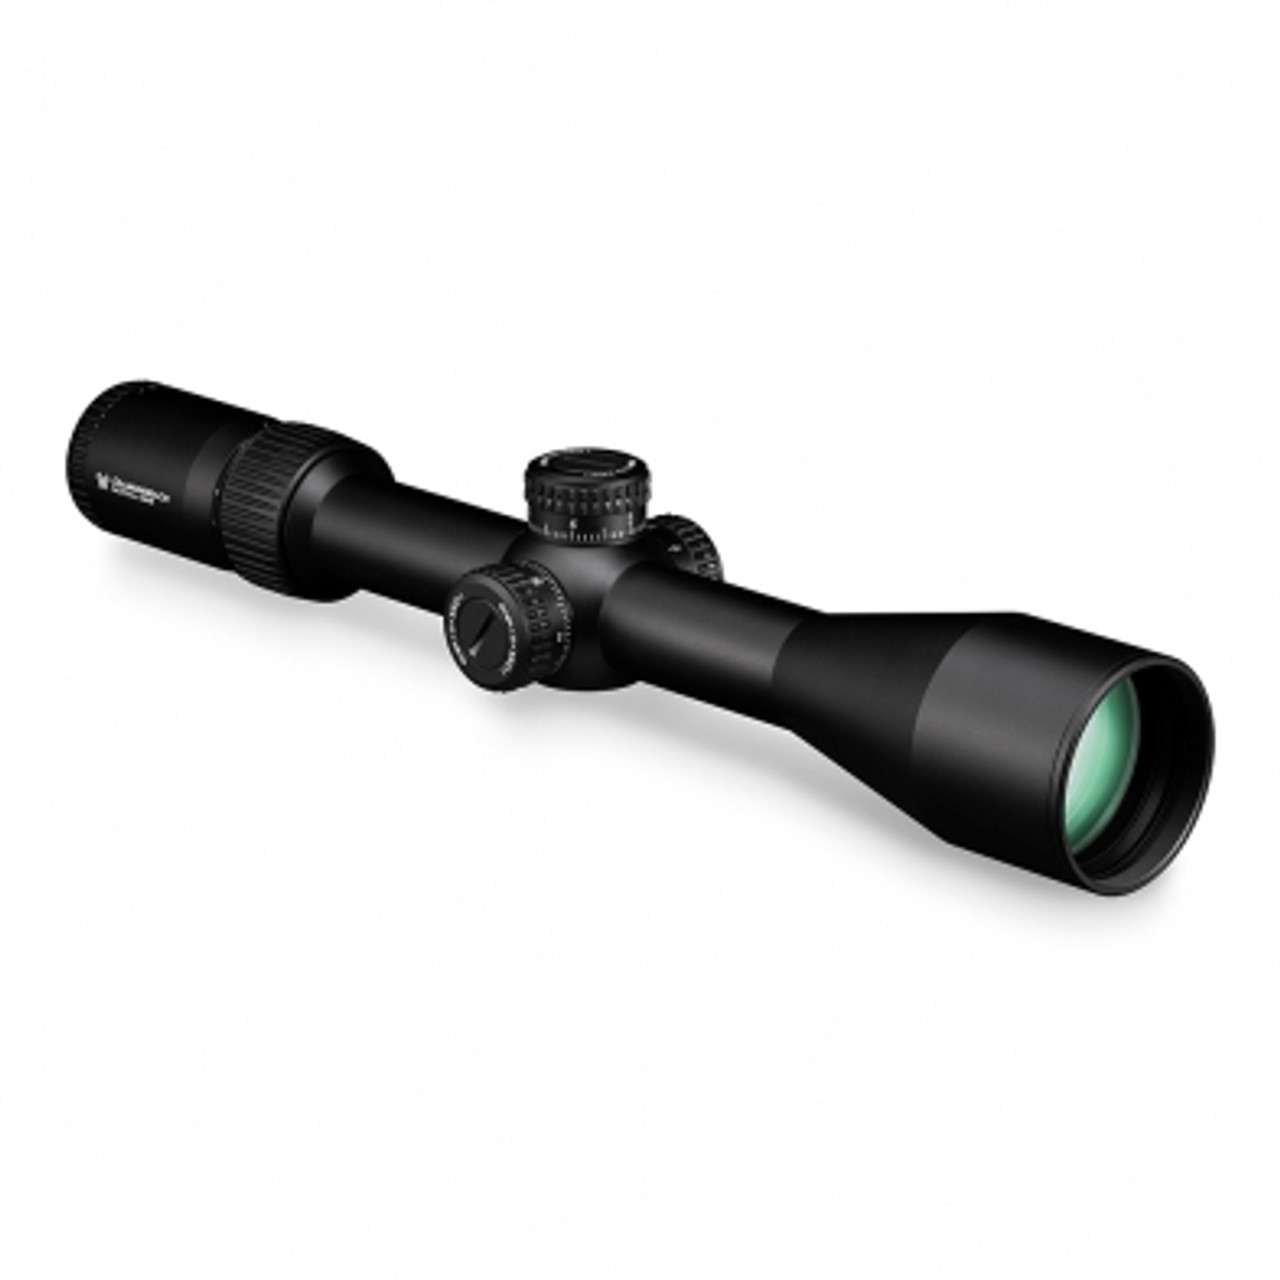 DIAMONDBACK TACTICAL 6–24X50 FFP RIFLESCOPE EBR-2C MRAD
VT-DBK-10029
Vortex presents affordable first focal plane (FFP) riflescopes. The first focal plane reticle, a feature ordinarily reserved for 4-figure-priced optics, allows shooters to use the information-packed EBR-2C reticles for ranging, holdovers or windage corrections on any magnification. Housed inside its durable, one-piece aluminum tube is a 4x optical system delivering excellent edge-to-edge clarity and sharp resolution. Exposed elevation and windage turrets are low profile enough to stay out of the way in packing situations, but offer the quickness, ease and precision of dialing accurate shots at distance. A side adjustable parallax gives shooters peace of mind by removing parallax error from the equation from 10 yards to infinity.

Dual use for hunting and tactical shooting.

SKU	VT-DBK-10029
Magnification	6 – 24
Objective Lens Diameter	50 mm
Eye Relief	3.9 inches
Field of View	18.0 – 4.5 feet/100 yards
Tube Size	30 mm
Turret Style	Exposed Tactical
Adjustment Graduation	0.1 mrad
Travel per Rotation	6 mrad
Max Elevation Adjustment	 19 mrad
Max Windage Adjustment	19 mrad
Parallax Setting	10 yards to infinity
Length	14.28 inches
Weight	24.6 ounces
Riflescope Manual (.pdf)	Download PDF
Reticle Manual (.pdf)	Download PDF
Included in the Box
Lens covers
Lens cloth
Sunshade

 
VIP Unconditional Lifetime Warranty
Diamondback Dimensions
Lengths
L1	L2	L3	L4	L5	L6
14.28	2.30	2.70	6.56	3.98	3.77
Heights
H1	H2
2.25	1.73
Dimensions measured in inches.

OPTICAL FEATURES
XD™ Lens Elements	Extra-low dispersion (XD) glass increases resolution and color fidelity, resulting in crisp, sharp images.
Fully Multi-Coated Lenses	Anti-reflective coatings on all air-to-glass surfaces provide increased light transmission for greater clarity and low light performance
First Focal Plane	Scale of reticle remains in proportion to the zoomed image. Constant subtensions allow accurate holdover and ranging at all magnifications.
CONSTRUCTION FEATURES
Tube Size	30 mm diameter provides maximed internal adjustment and strength.
Nitrogen Gas Purged	Gas purged and o-ring sealed for fogproof and waterproof performance in all conditions.
Aircraft-Grade Aluminum	Constructed from a solid block of aircraft-grade aluminum for strength and rigidity.
Waterproof	O-ring seals prevent moisture, dust and debris from penetrating the riflescope for reliable performance in all environments.
Fogproof	Nitrogen gas purging prevents internal fogging over a wide range of temperatures.
Shockproof	Rugged construction withstands recoil and impact.
Hard Anodized Finish	Highly durable low-glare matte finish helps camouflage the shooter's position.
Precision-Glide Erector System	Uses premium components in the zoom lens mechanism to ensure smooth magnification changes under the harshest conditions.
Exposed Tactical Turrets	The Diamondback Tactical scopes feature tactical windage and elevation turrets with Zero Reset making adjustments back to zero easy and quick.
INTERNAL MECHANISM DESIGN FEATURES
Precision-Glide Erector System	Uses premium components in the zoom lens mechanism to ensure smooth magnification changes under the harshest conditions.
Precision-Force Spring System	Uses premium components in the erector-spring system to ensure maximum repeatability and ease of adjustment
CONVENIENCE FEATURES
Fast Focus Eyepiece	Allows quick and easy reticle focusing.
Magnification Rib	The raised rib on the magnification ring facilitates fast magnification changes in the heat of action.